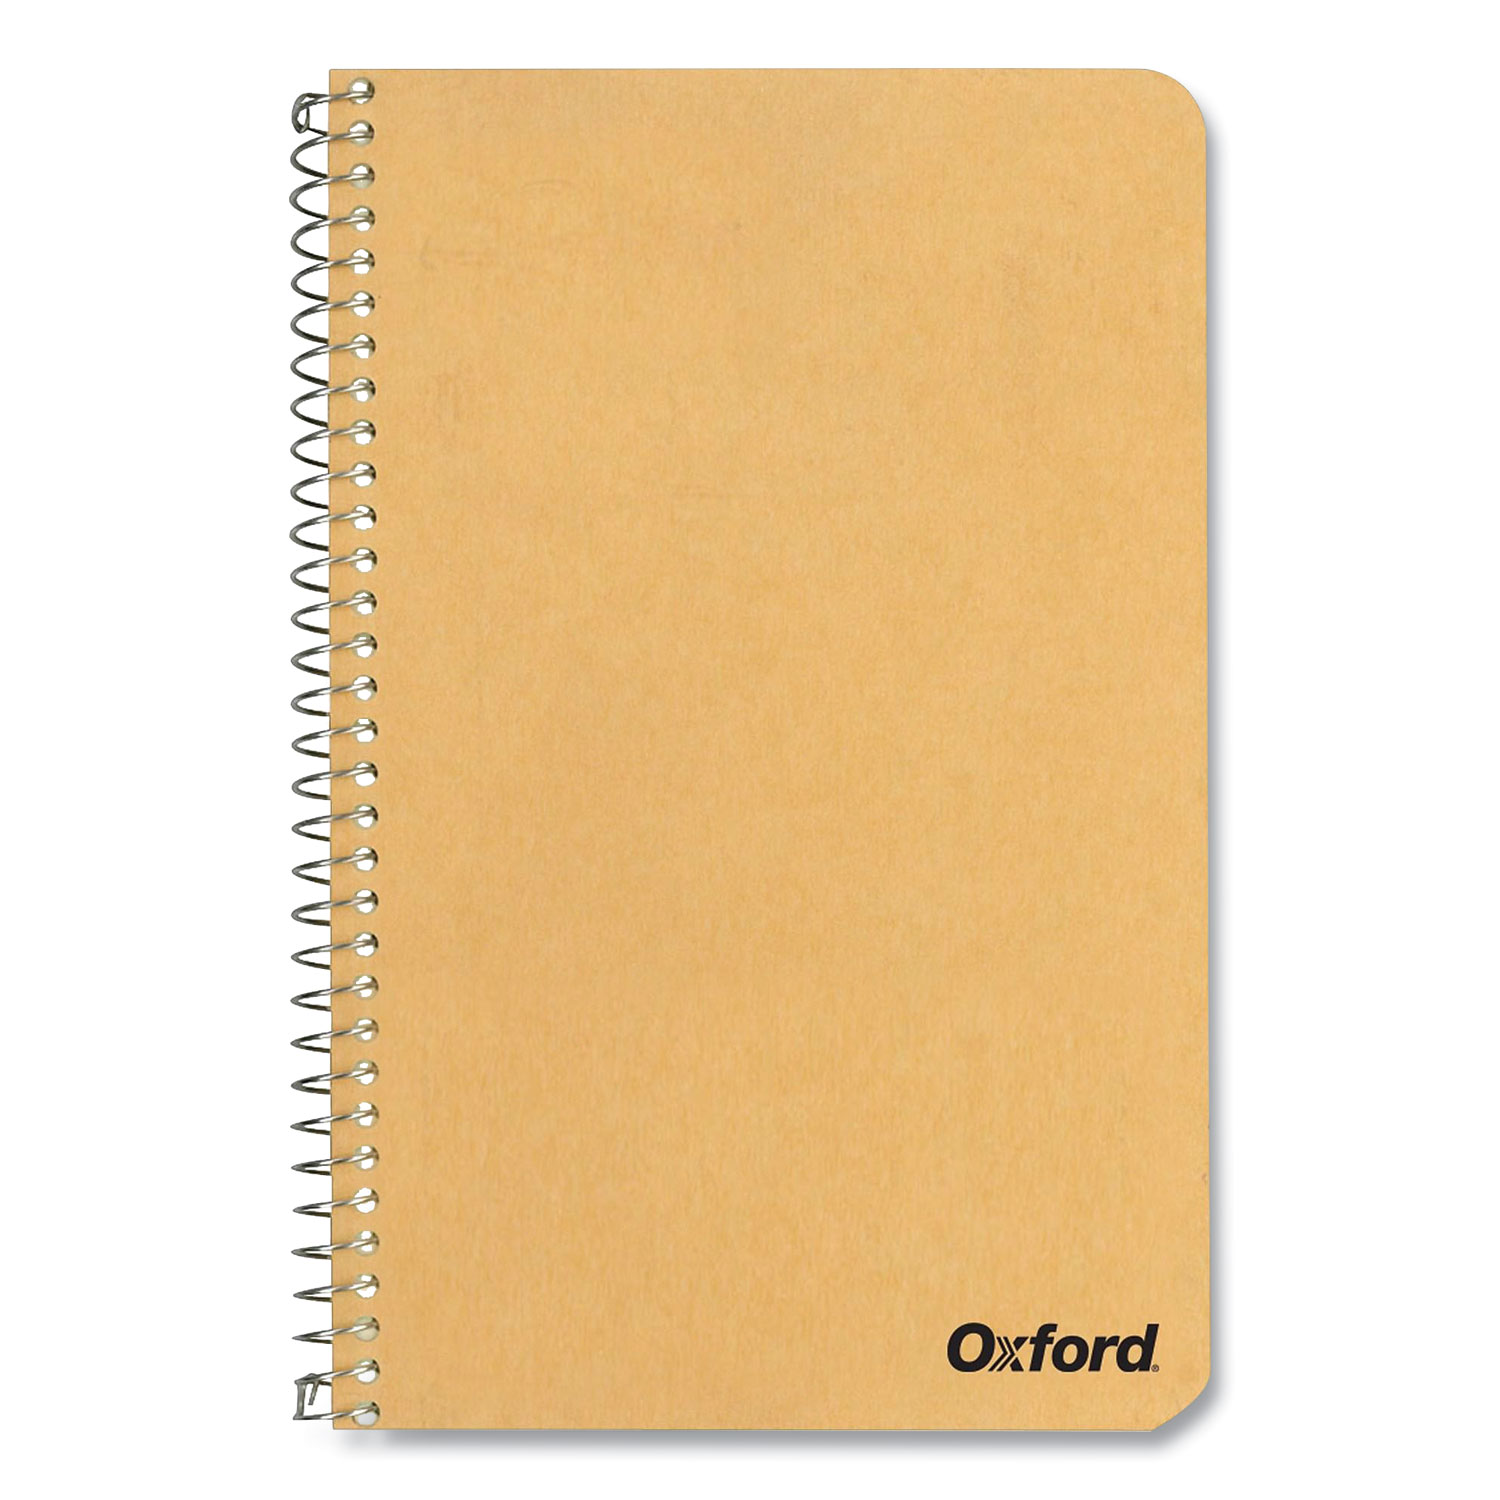 Oxford™ One-Subject Notebook, Medium/College Rule, Tan Cover, 11 x 8.5, 80 Green Tint Sheets